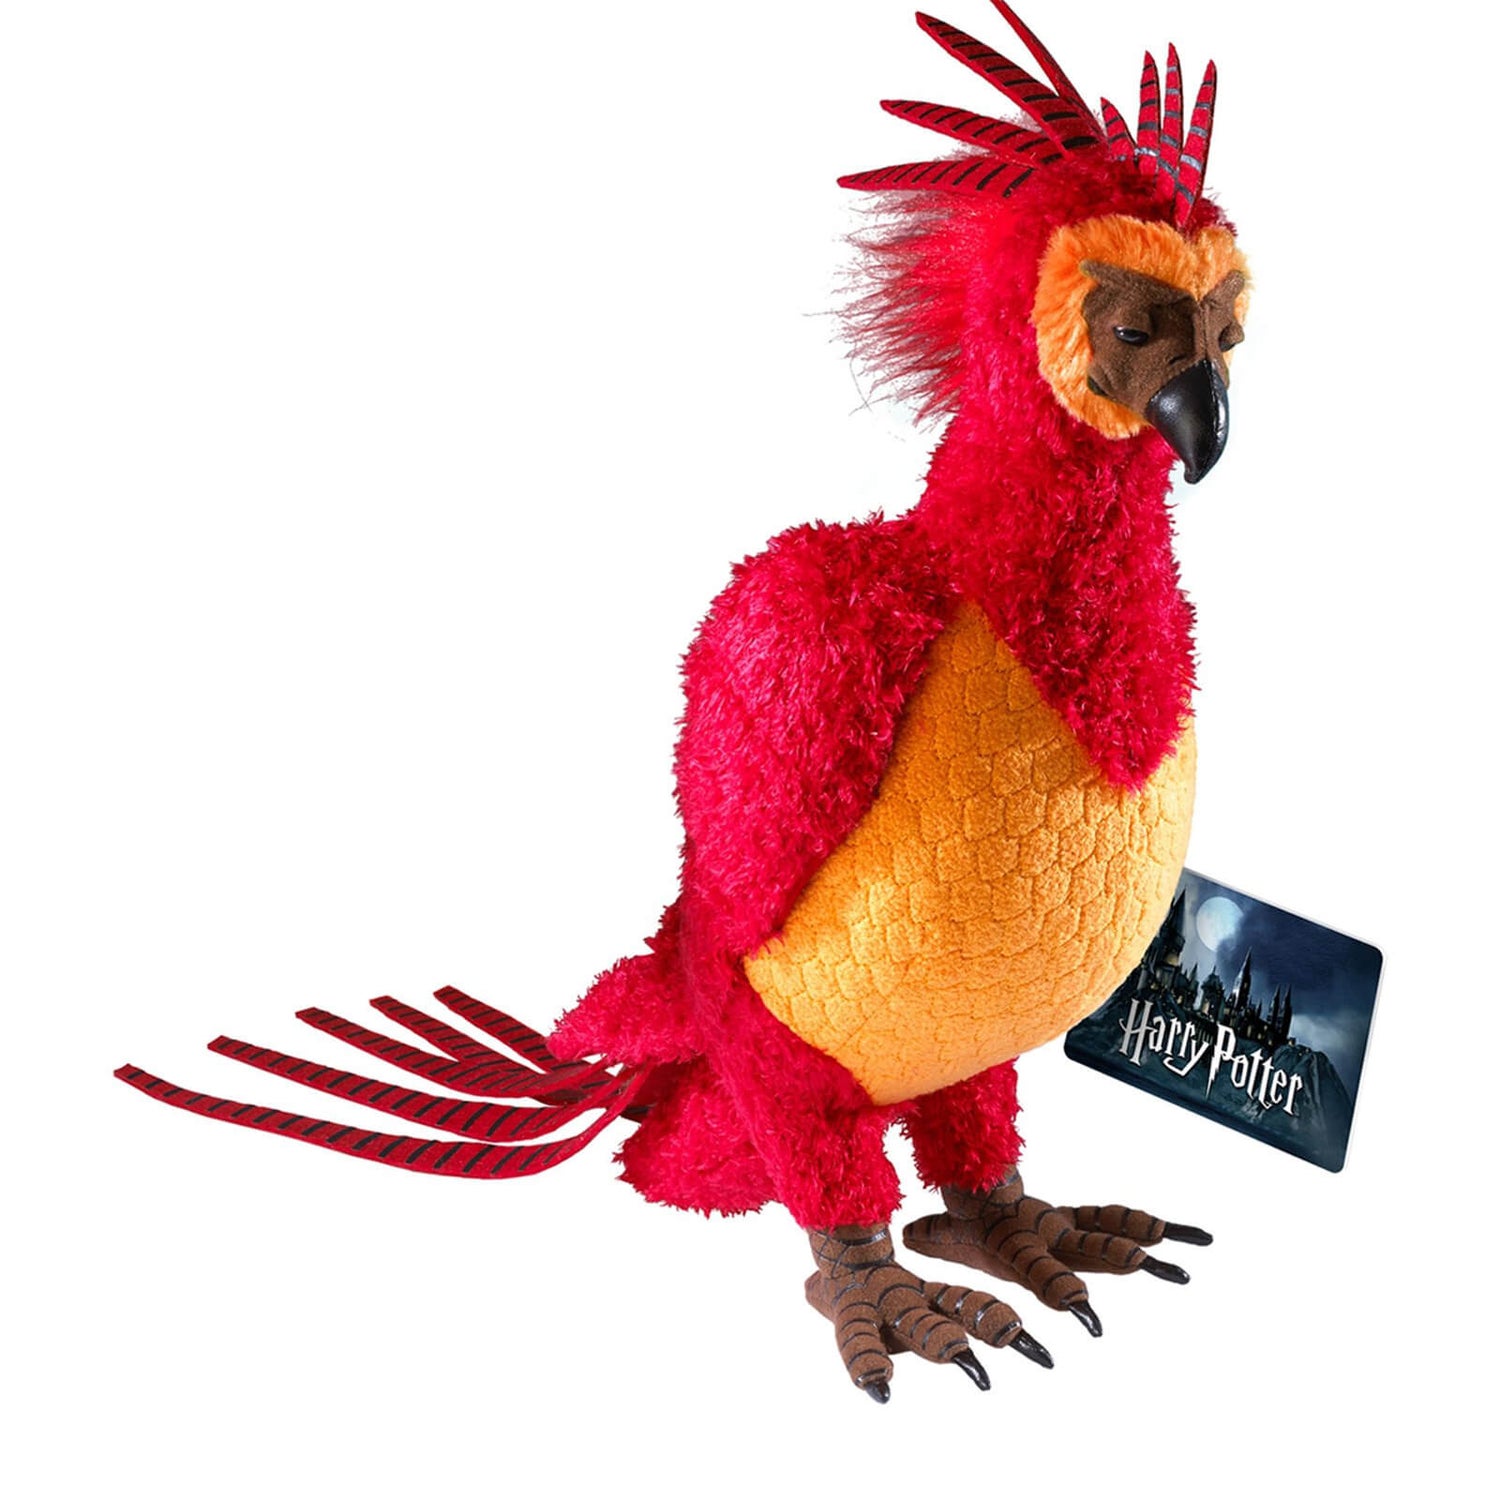 Harry Potter Fawkes the Pheonix Plush Toy - Red